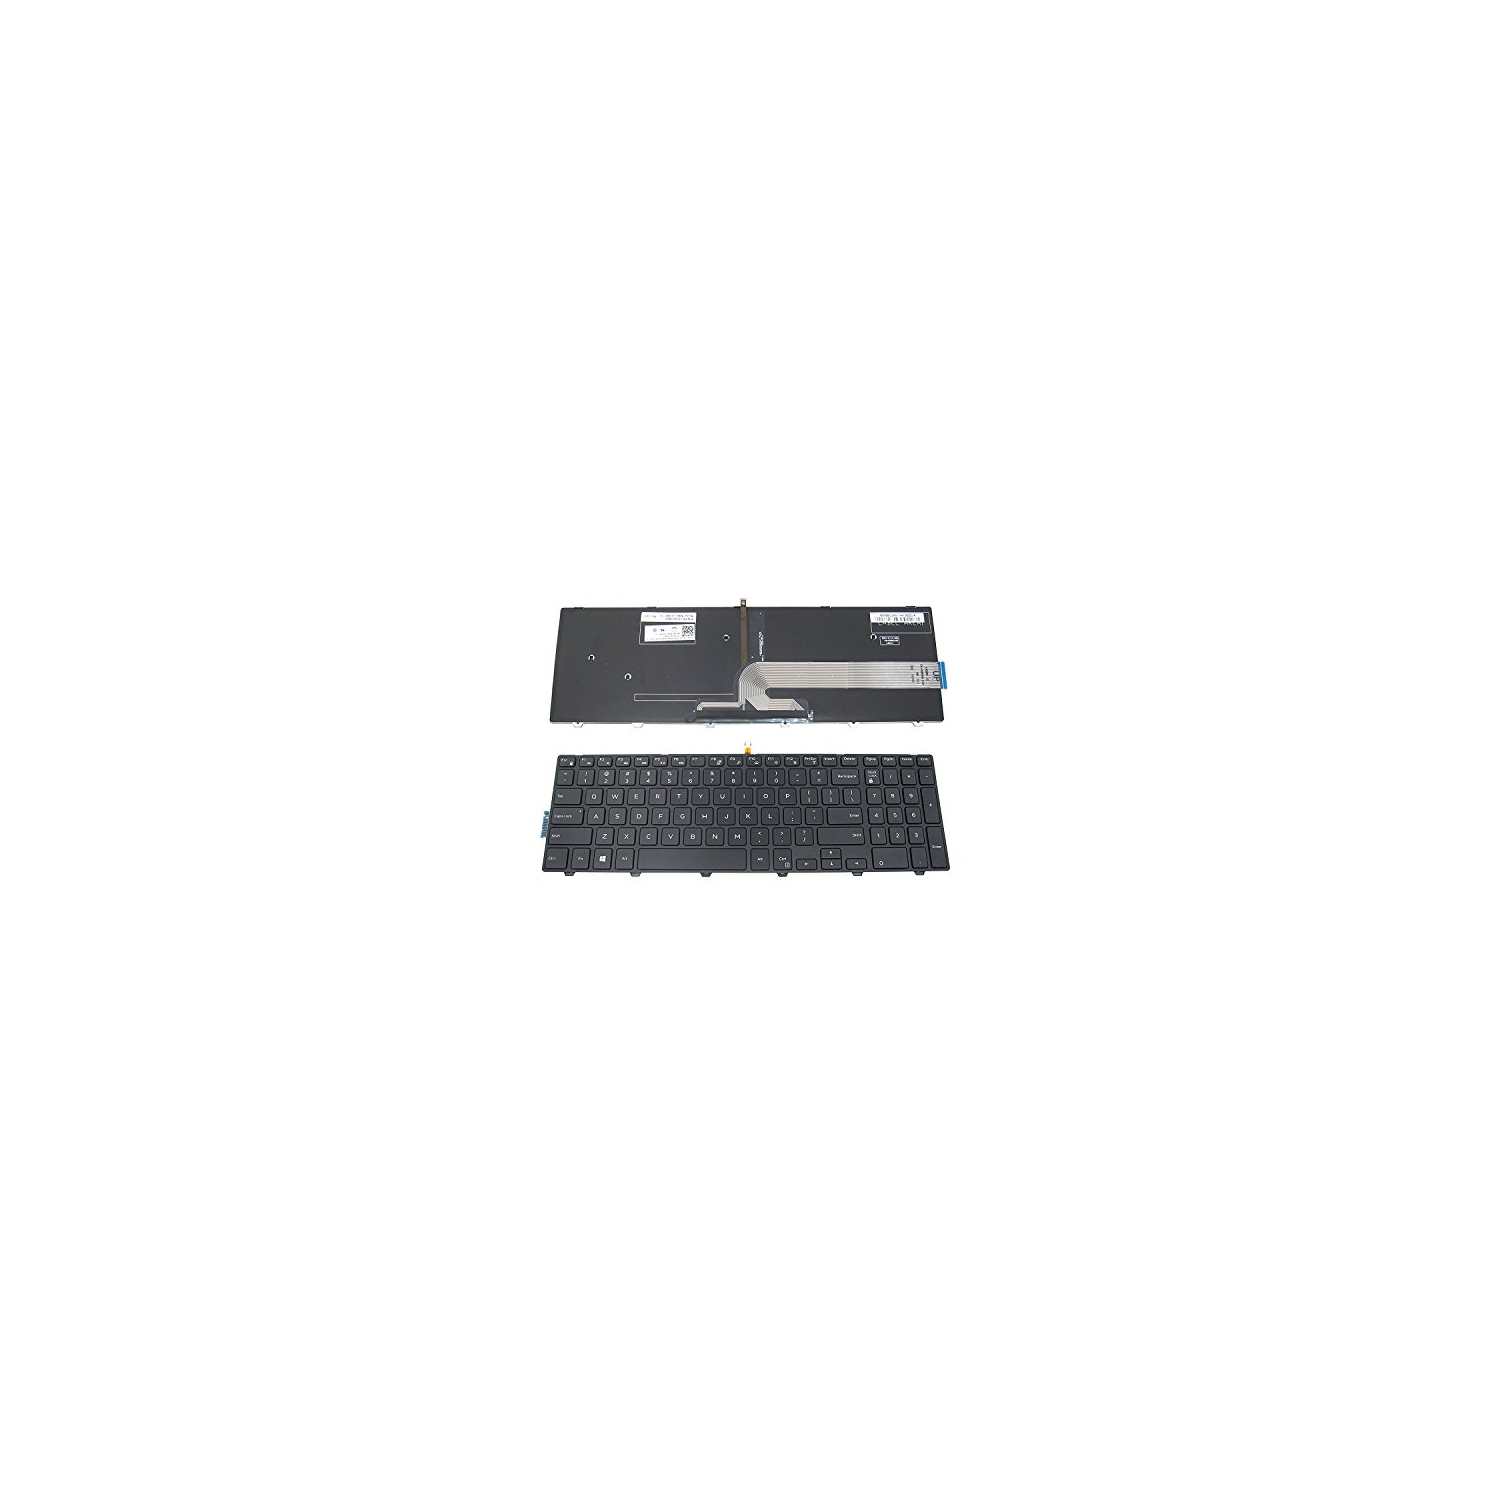 LaptopKing Replacement Keyboard for Dell Inspiron Dell Latitude 15 3000 Series 3541 3542 3543 3551 3552 3553 3558, 5000 Series